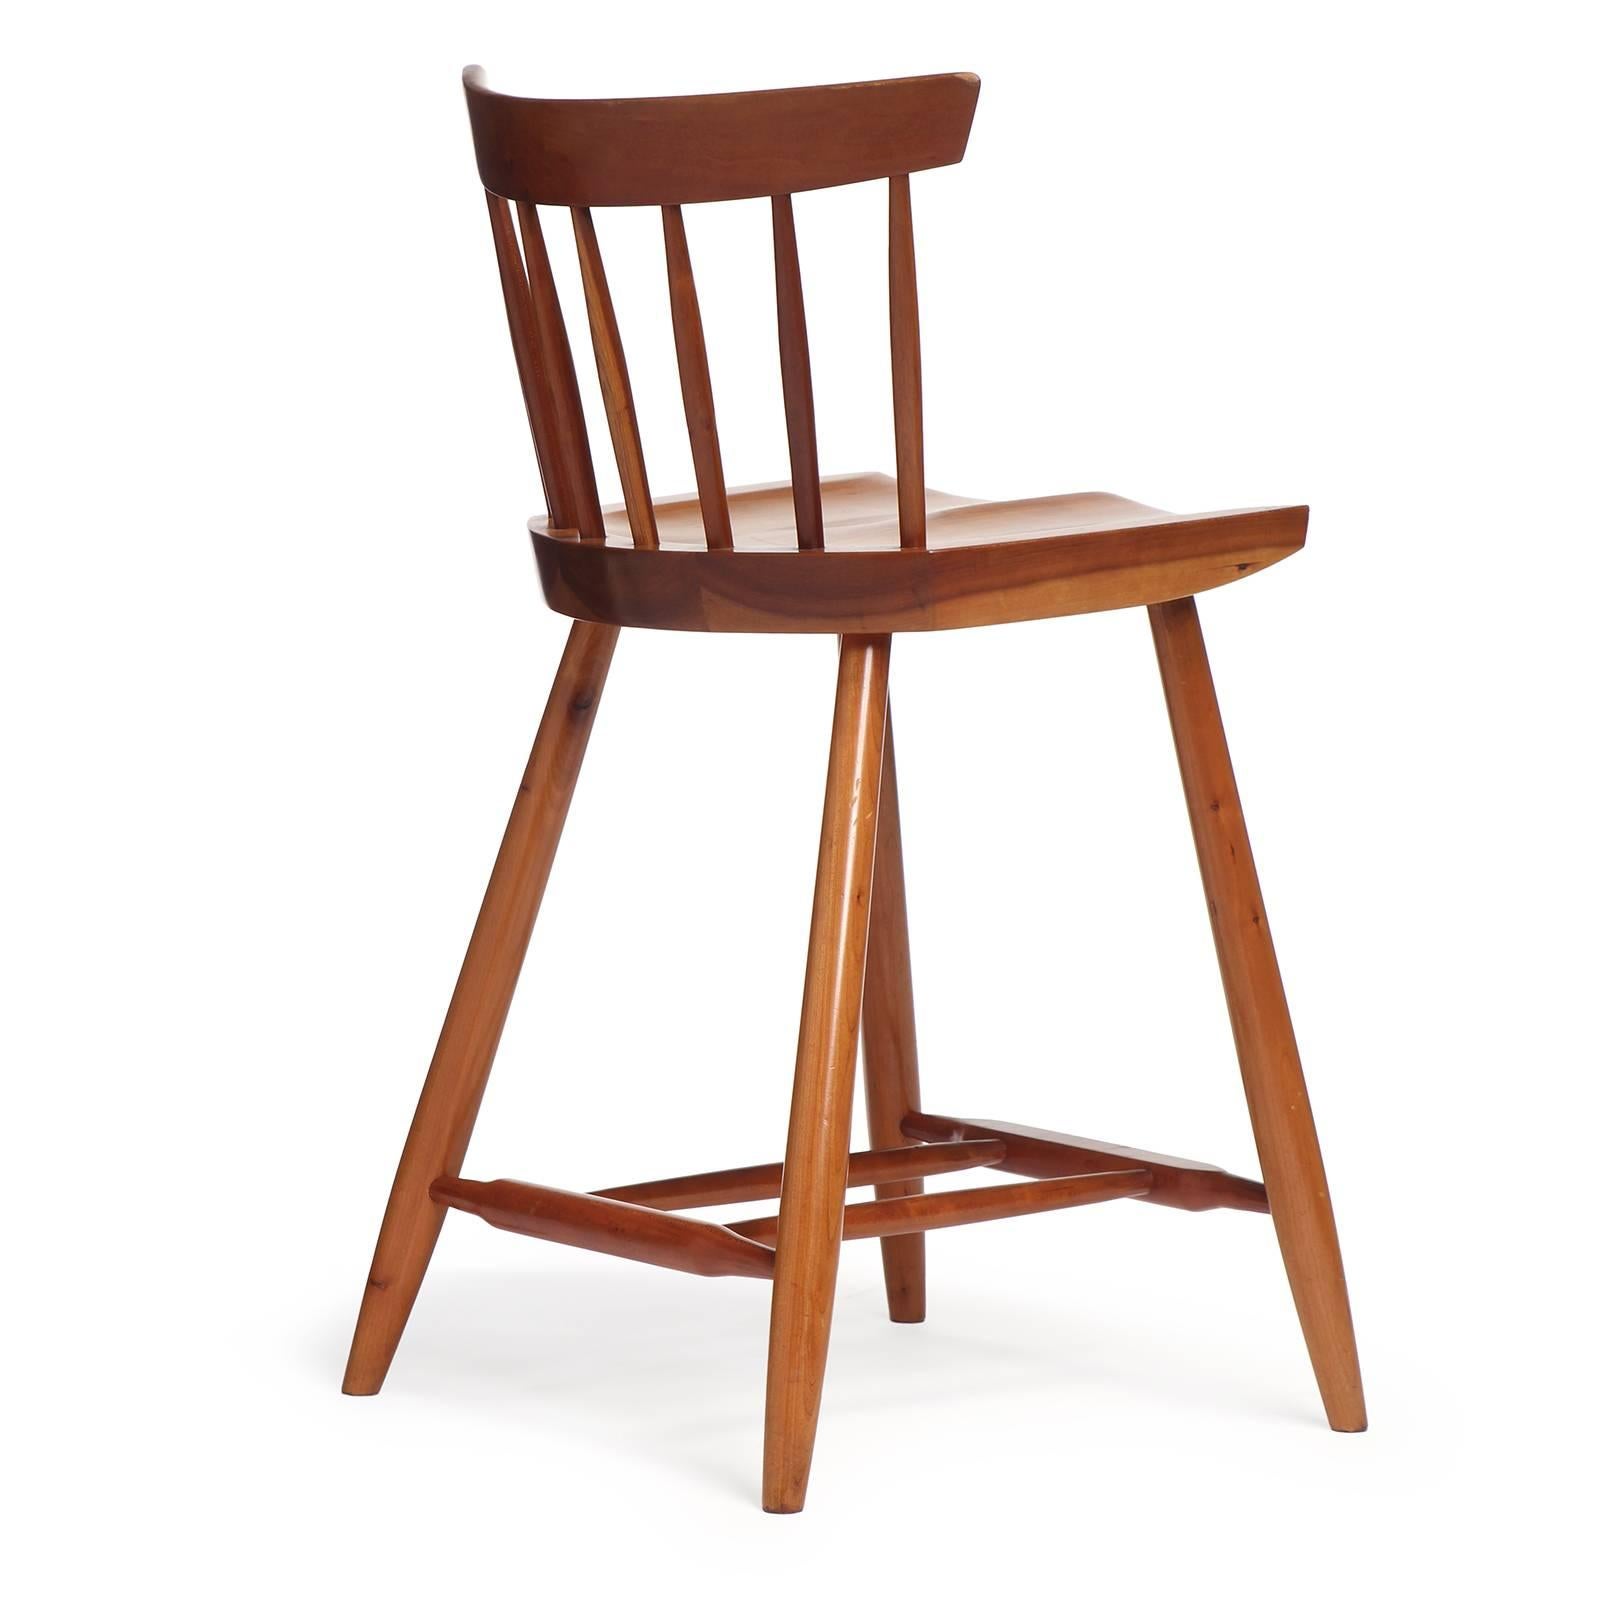 A cherry wood barstool having hand-hewn spindles supporting a curved backrest. The shaped shaped seat floats on four tapered dowel legs with a footrest stretcher.